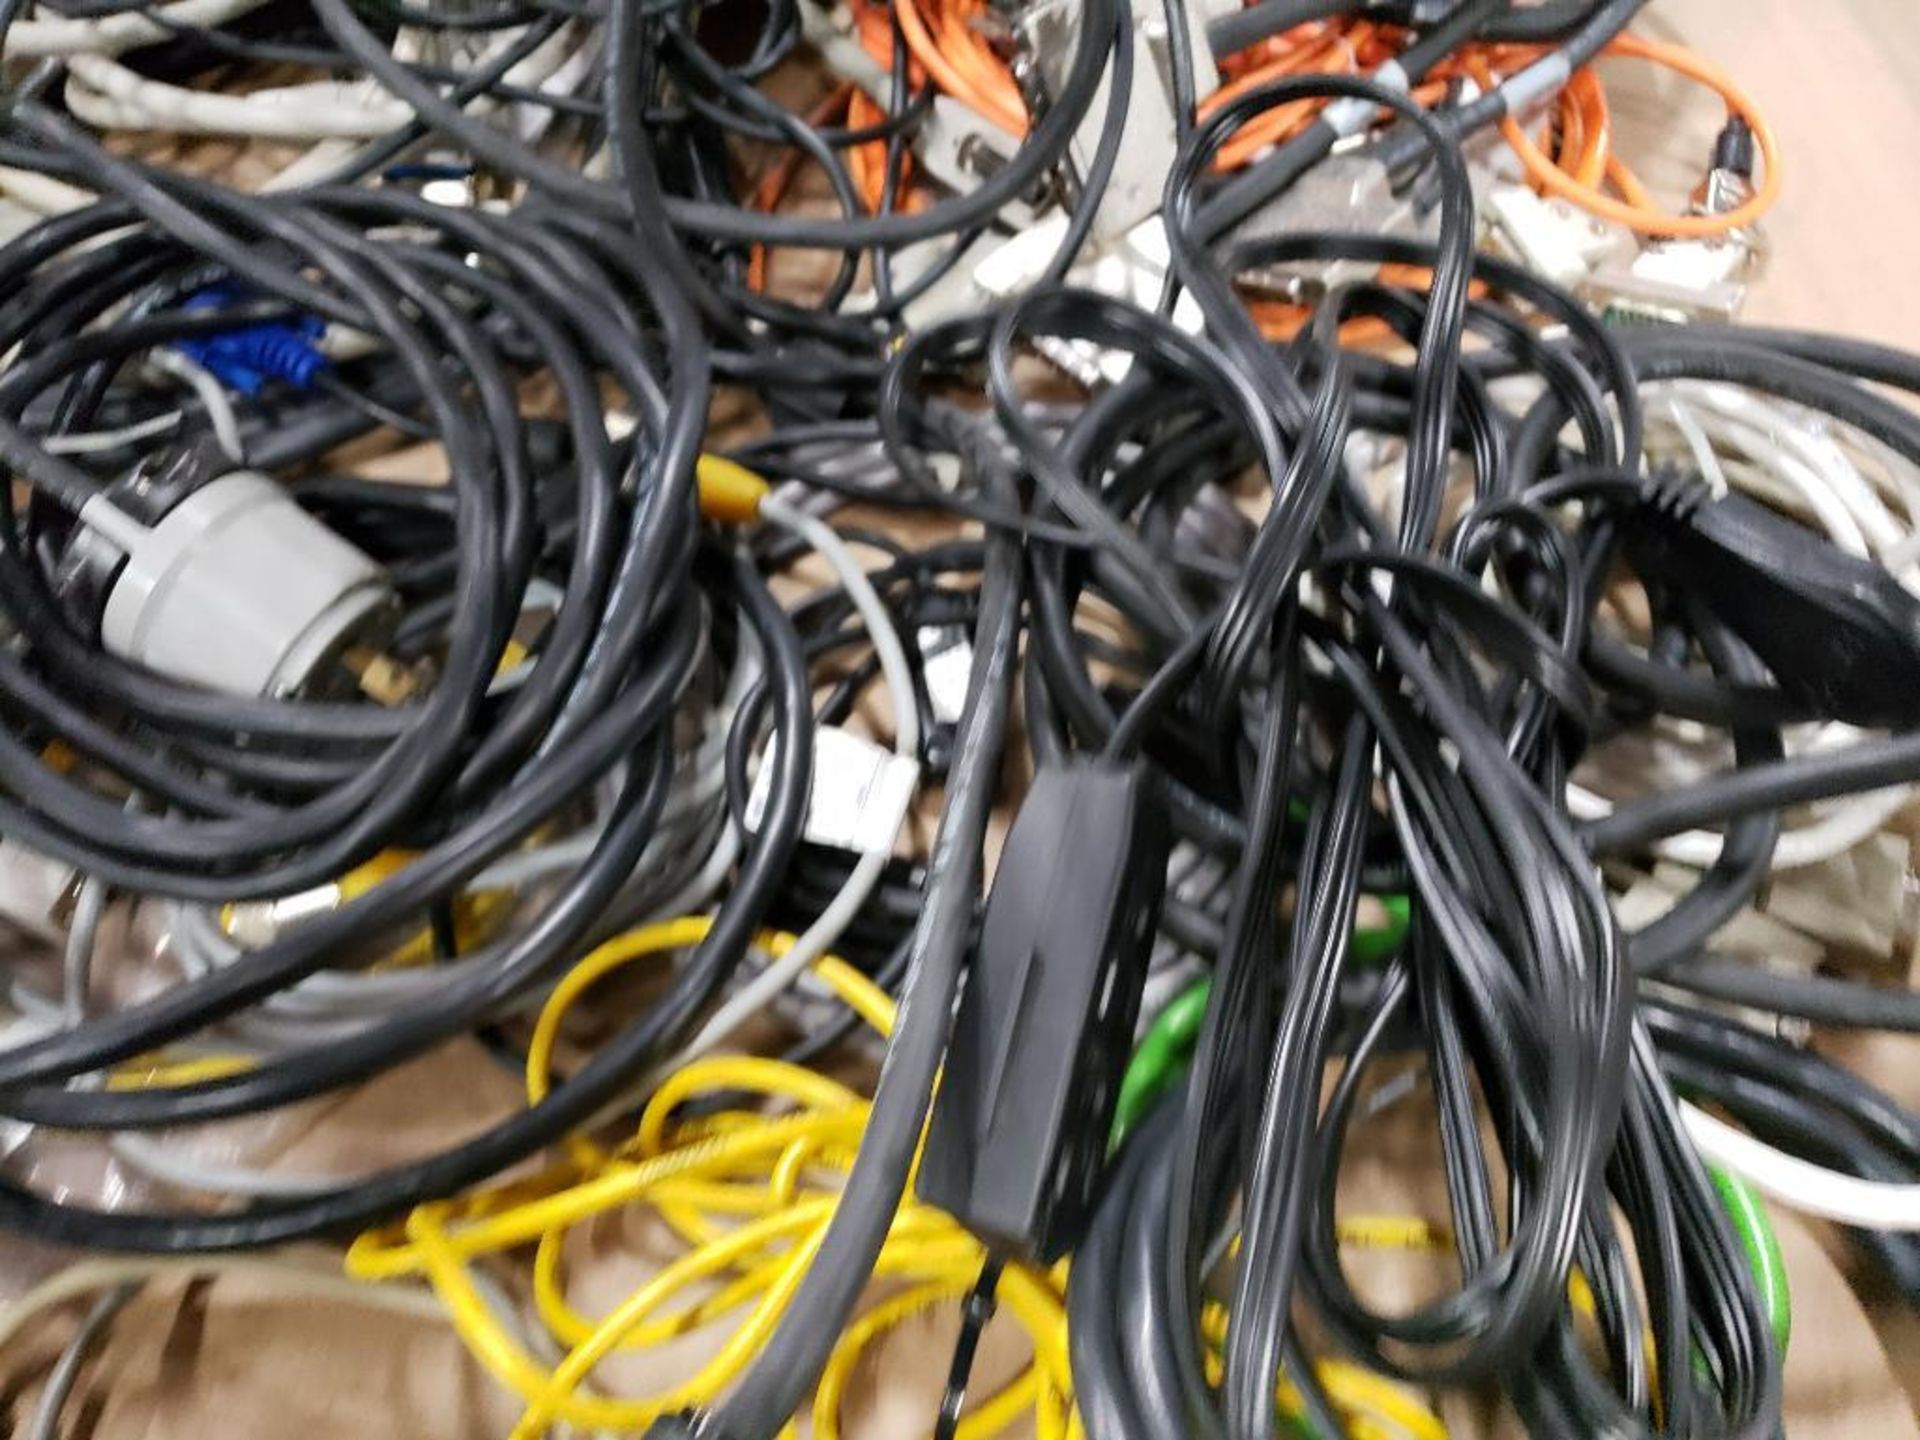 Large assortment of power and connection cordsets. - Image 6 of 10